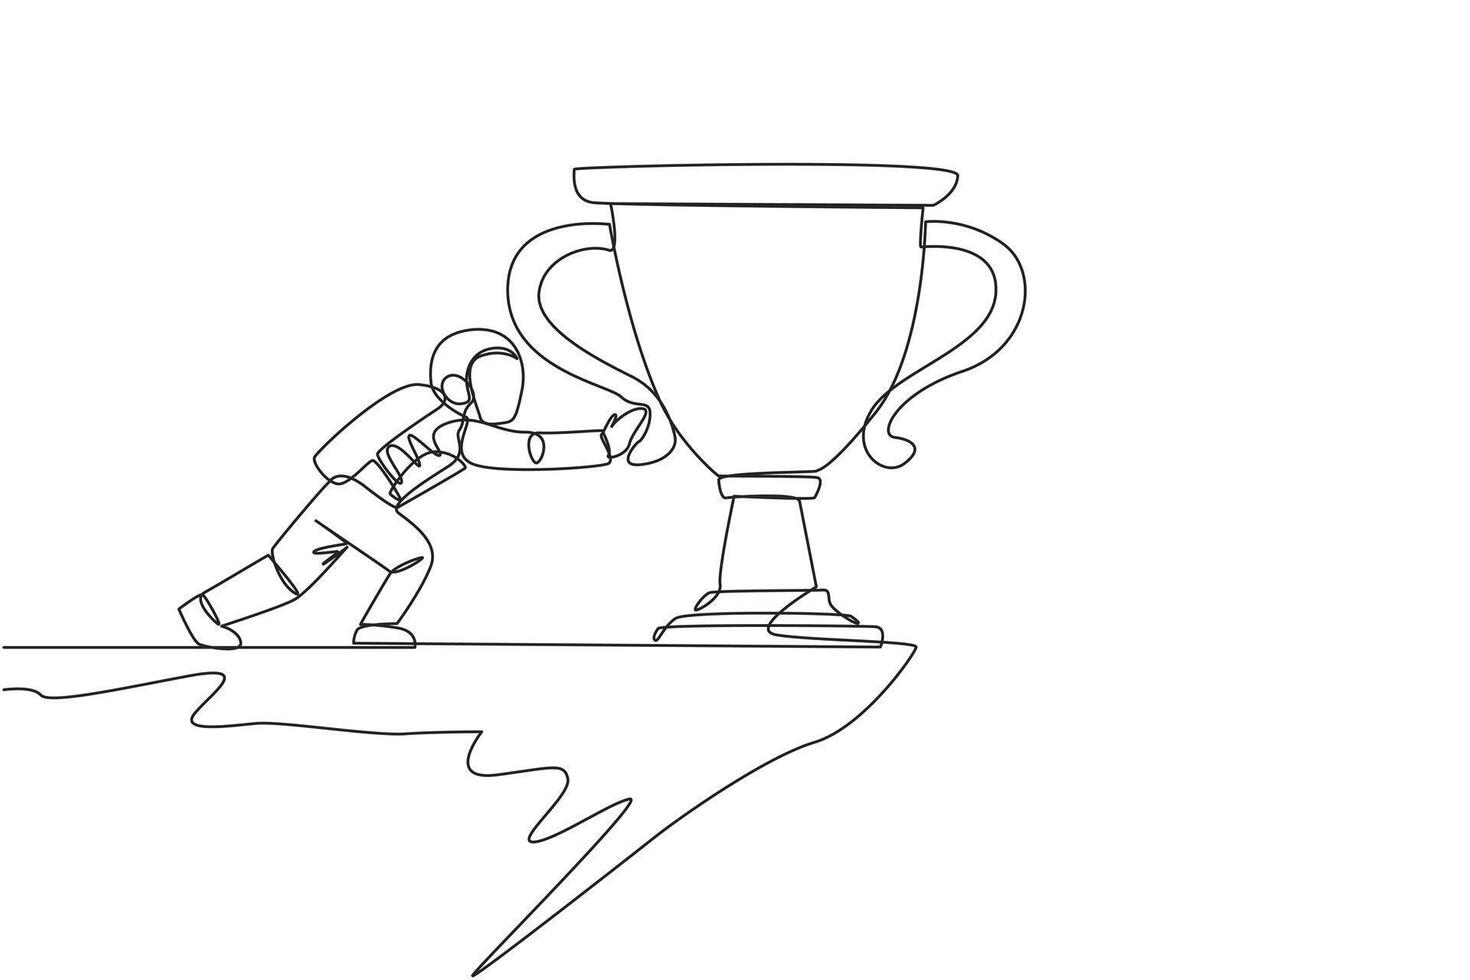 Continuous one line drawing astronaut pushes giant trophy over the edge of a cliff. There are no individual trophies, expedition teamwork is preferred. Single line draw design vector illustration